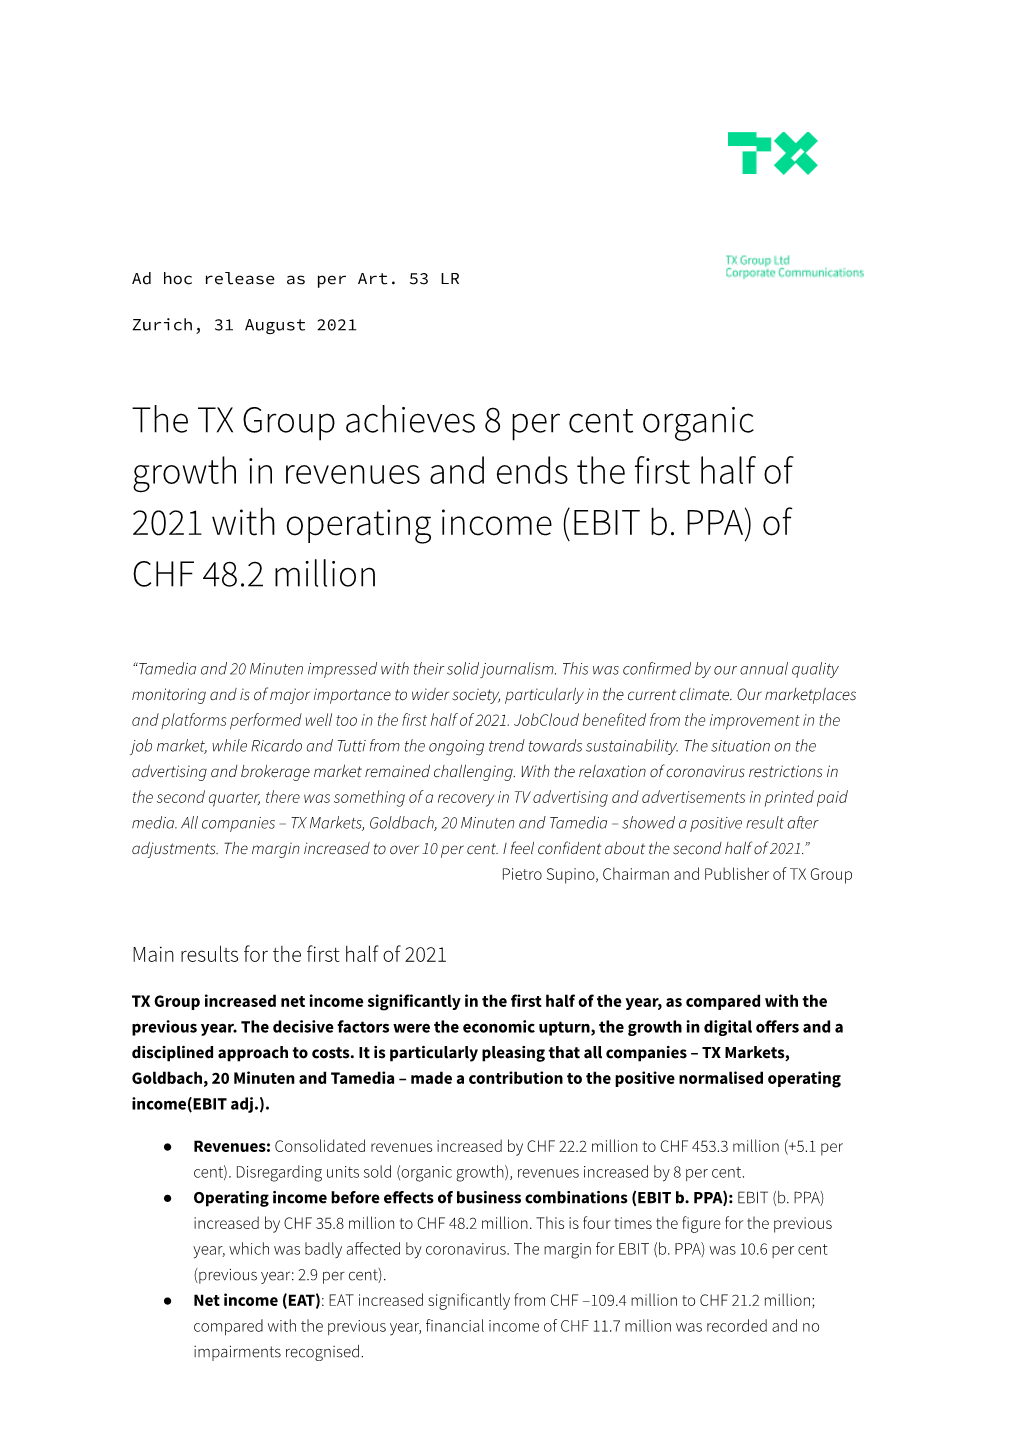 The TX Group Achieves 8 Per Cent Organic Growth in Revenues and Ends the First Half of 2021 with Operating Income (EBIT B